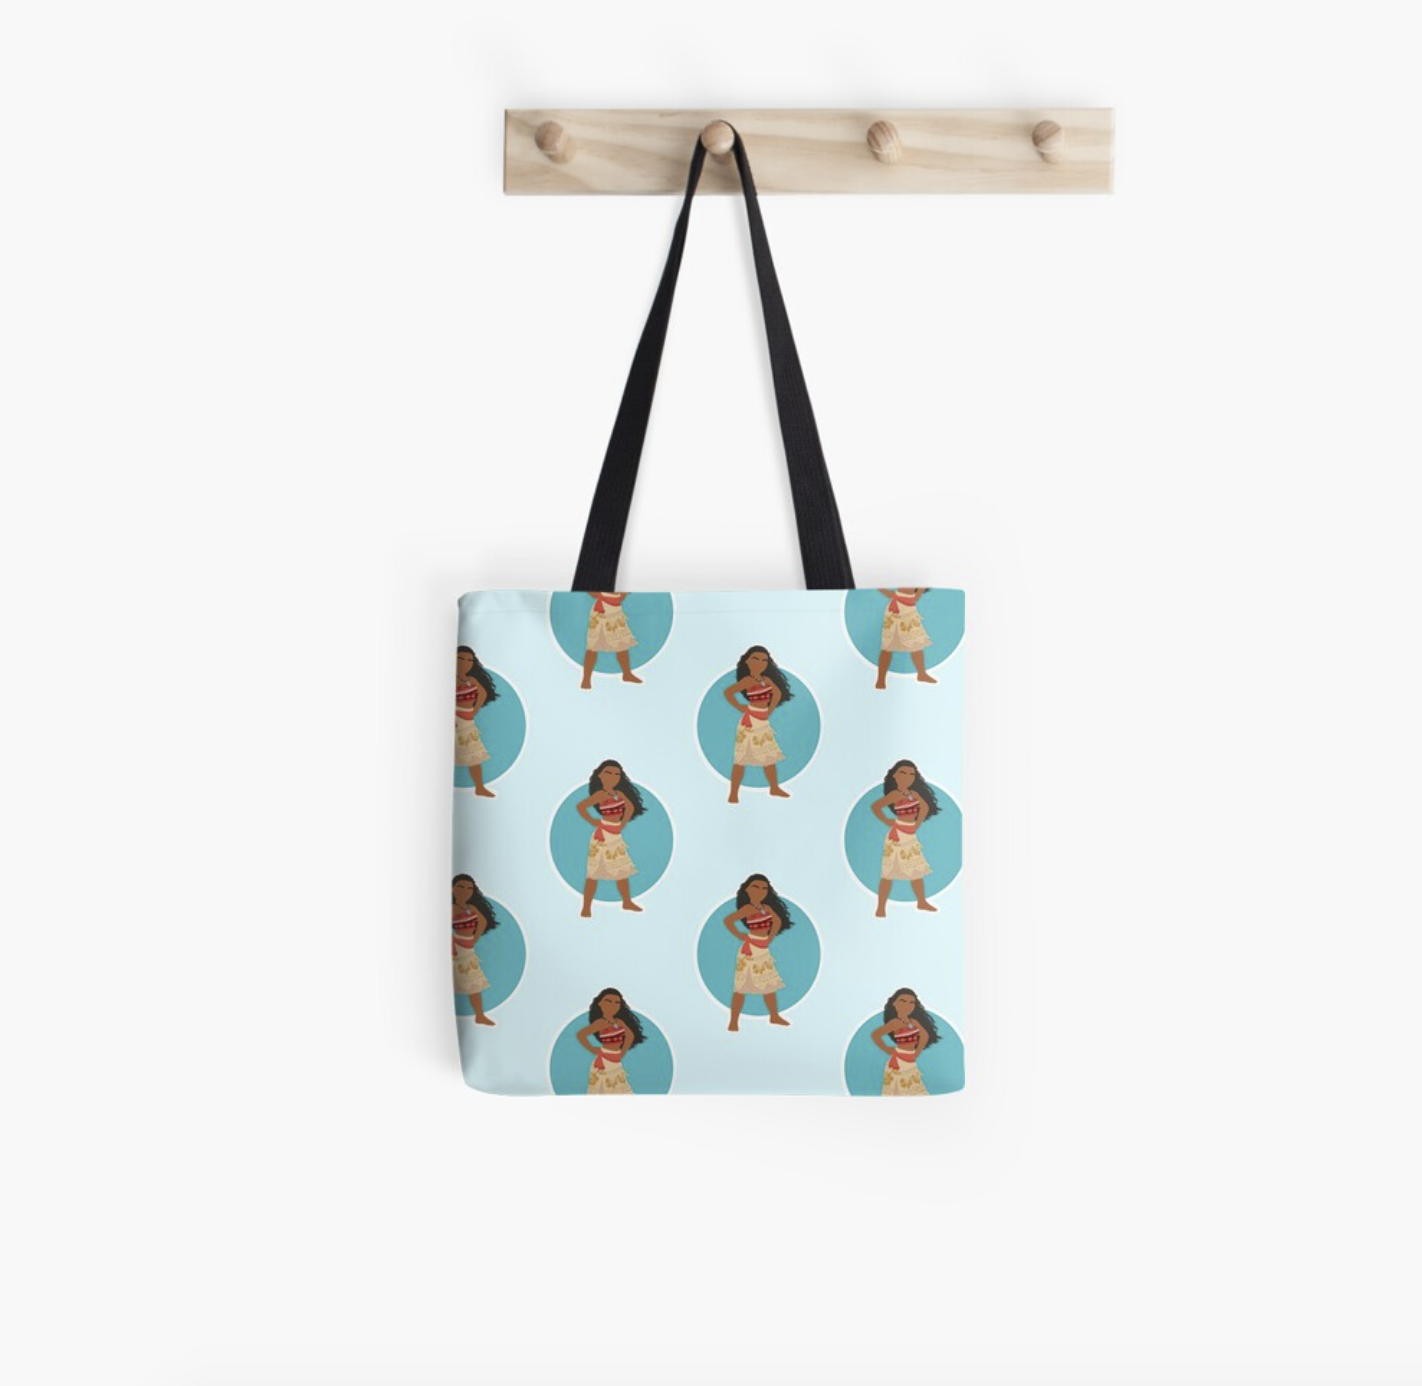 the tote bag in blue with Moana figures all over it and a black strap